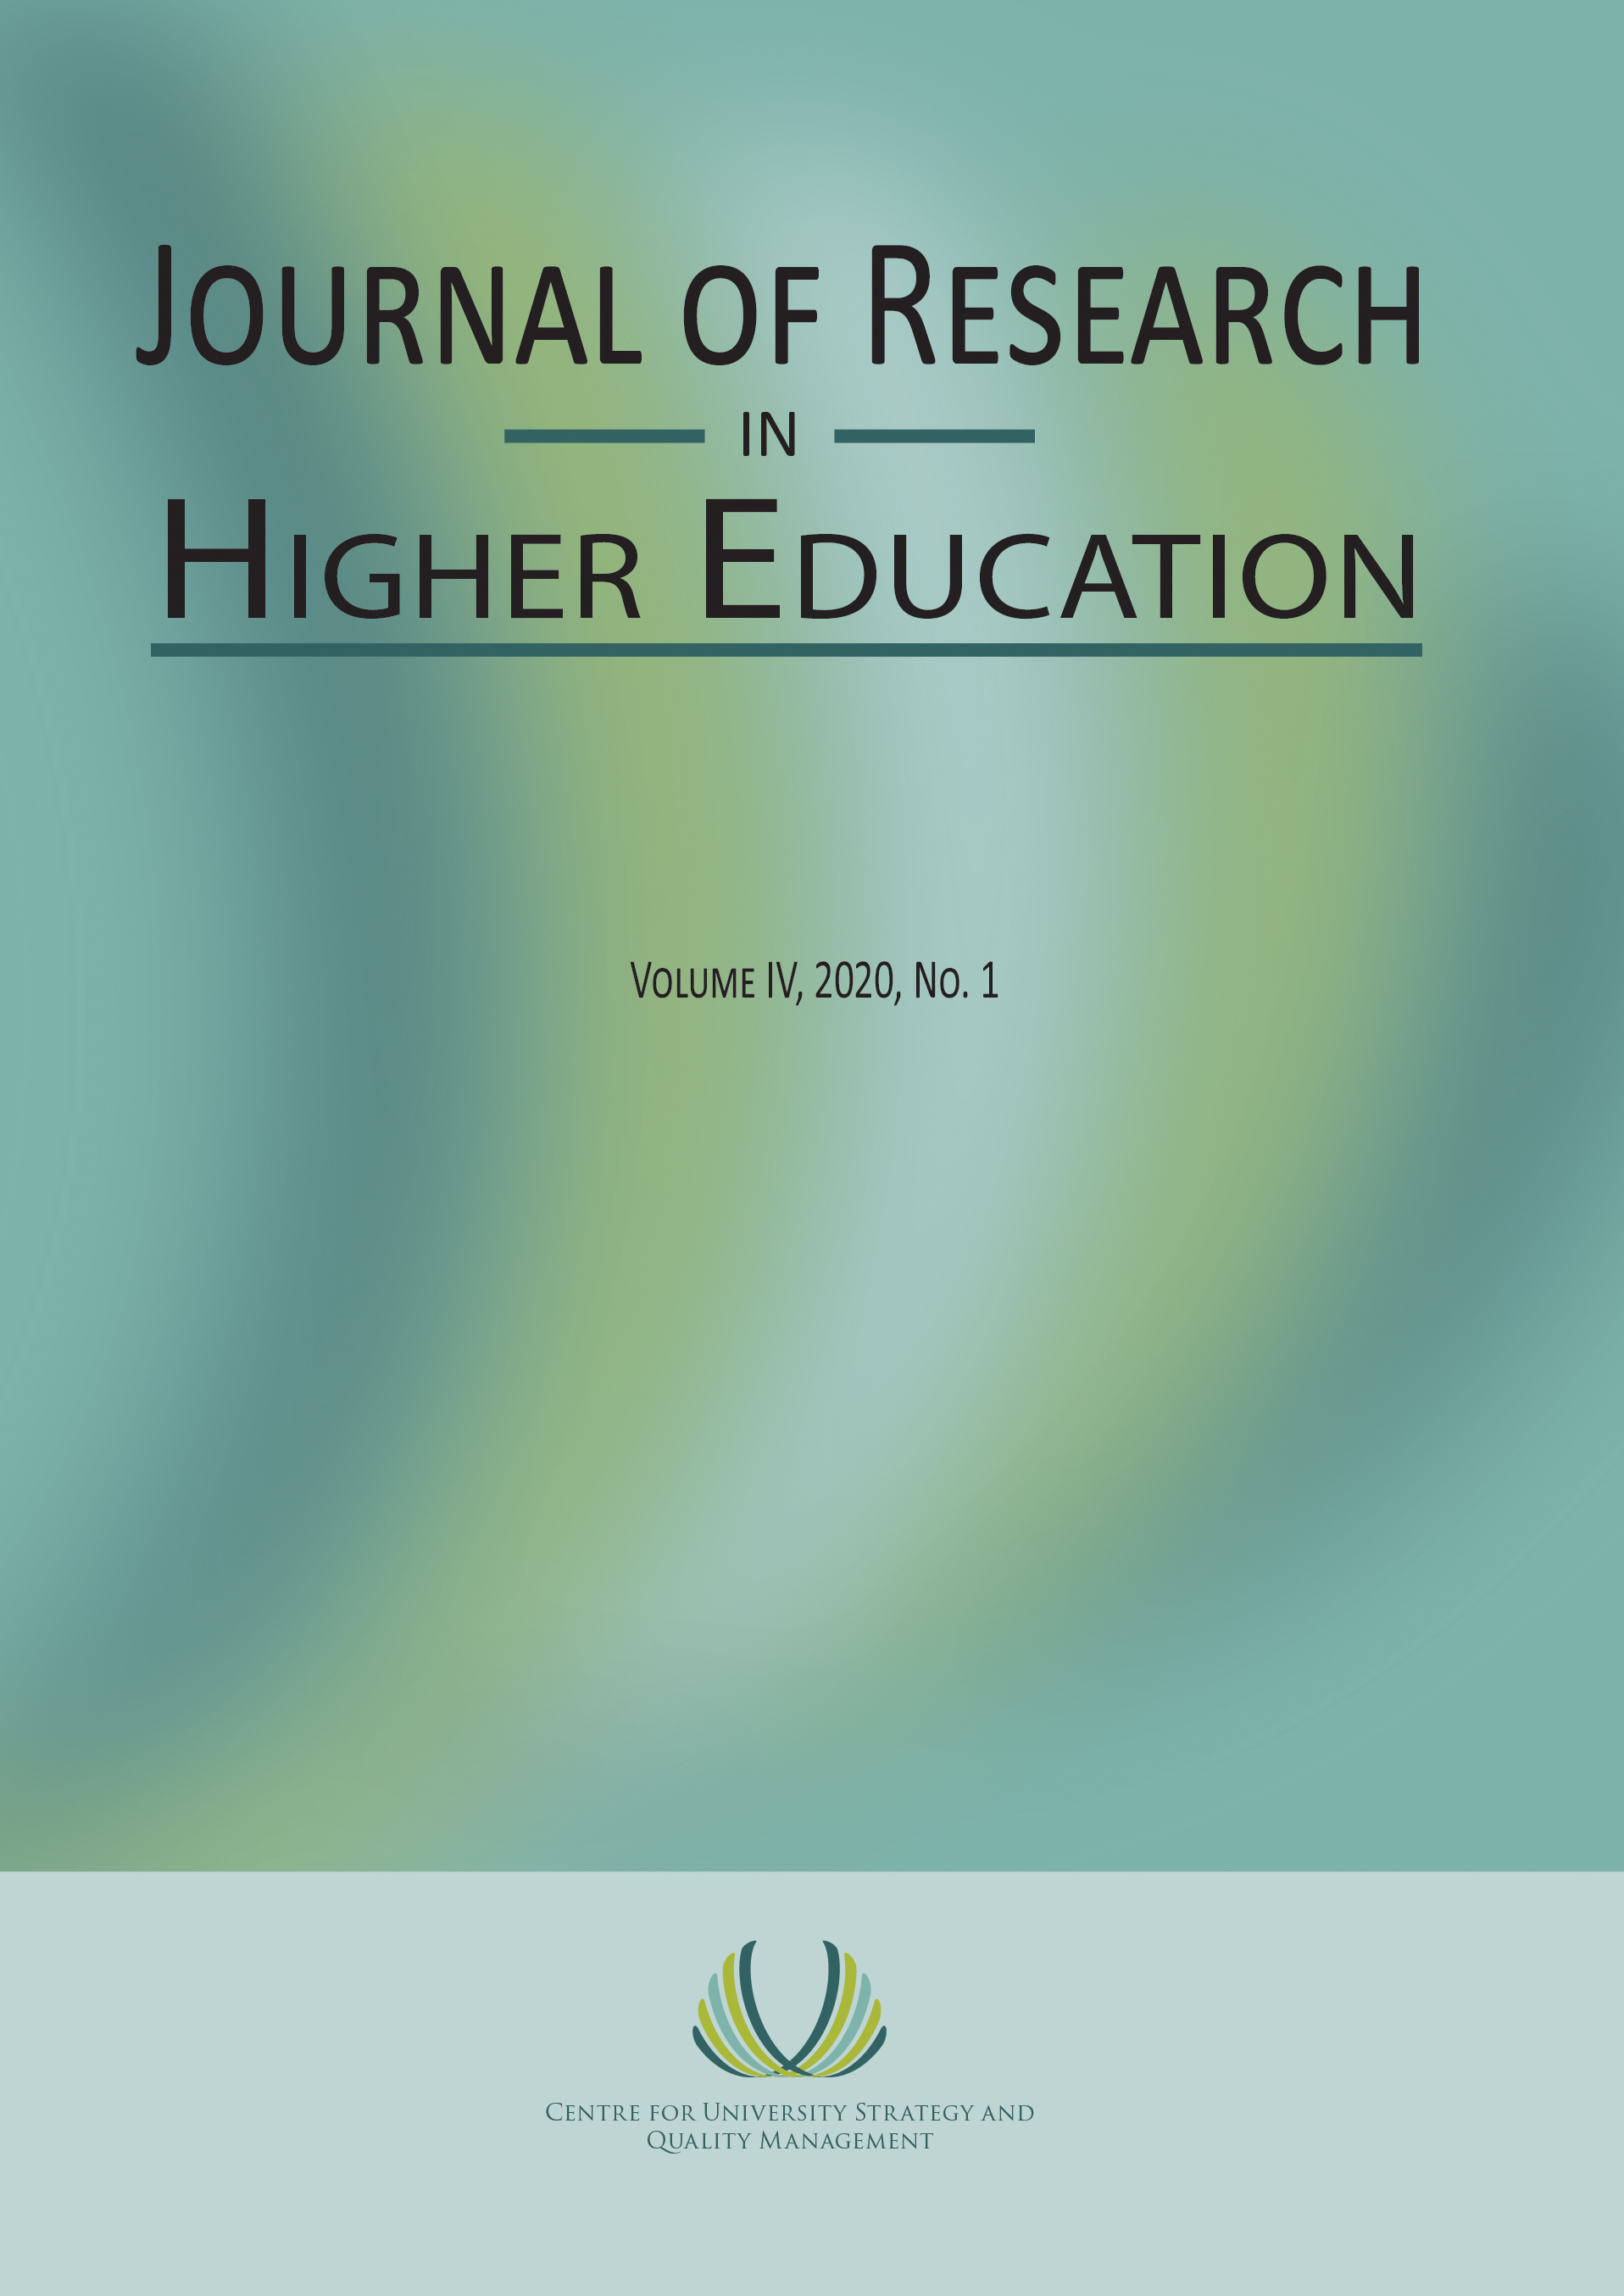 The Influence of the COVID-19 Epidemic on Teaching Methods in Higher Education Institutions in Israel